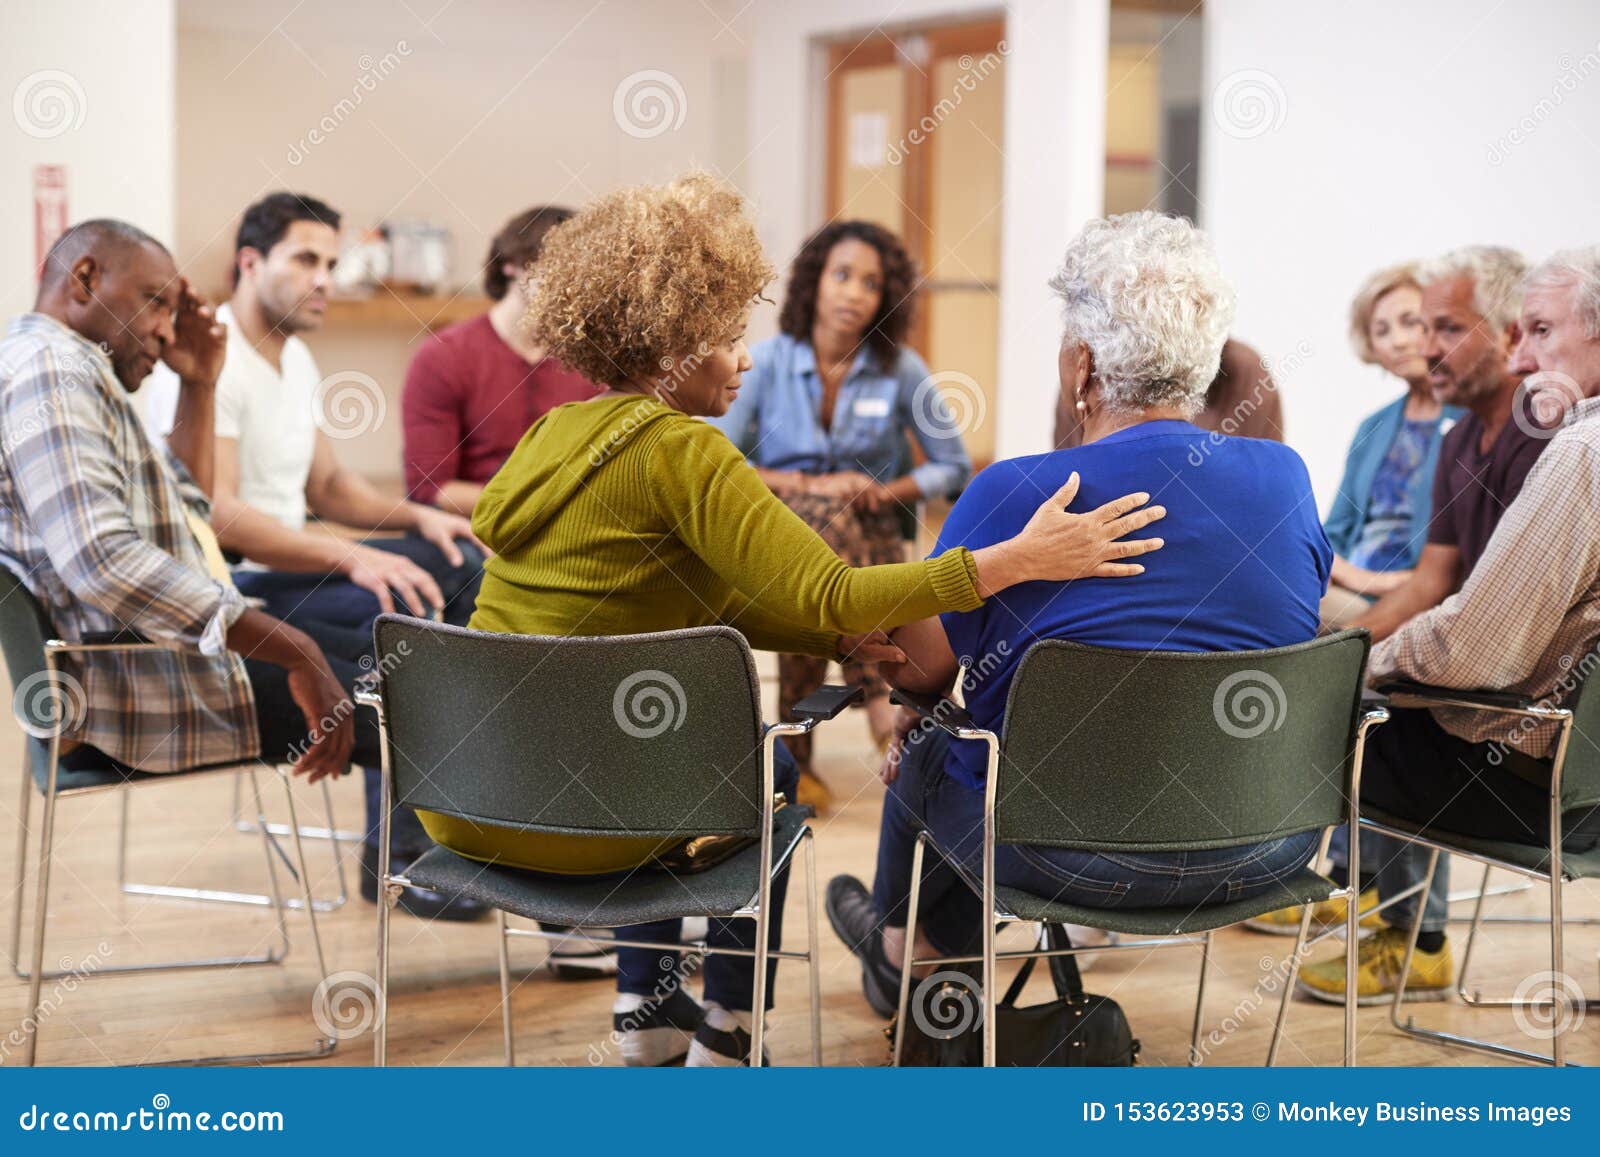 people attending self help therapy group meeting in community center